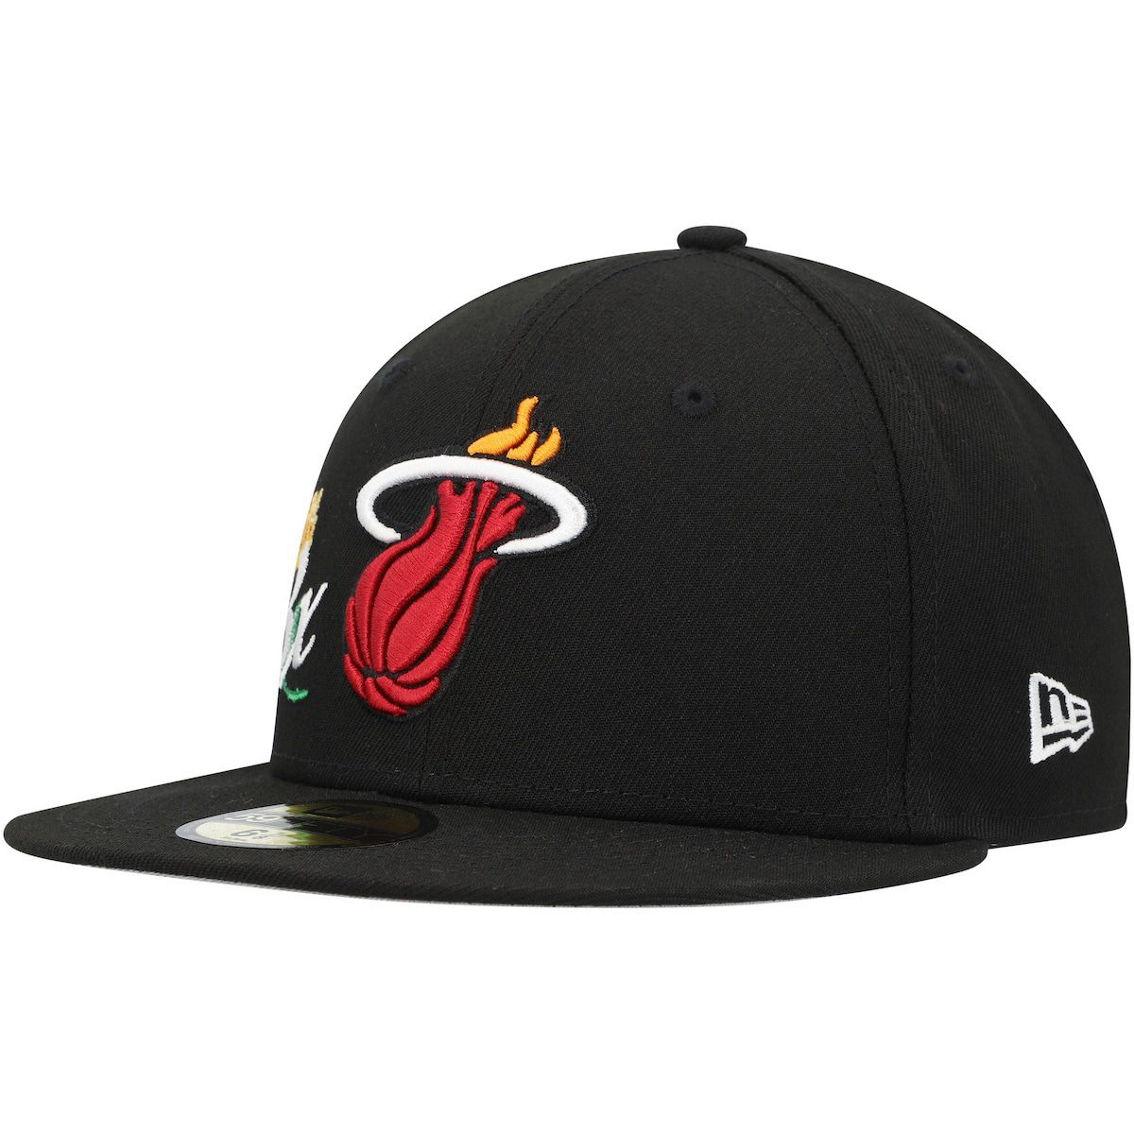 New Era Men's Black Miami Heat Crown Champs 59FIFTY Fitted Hat - Image 4 of 4